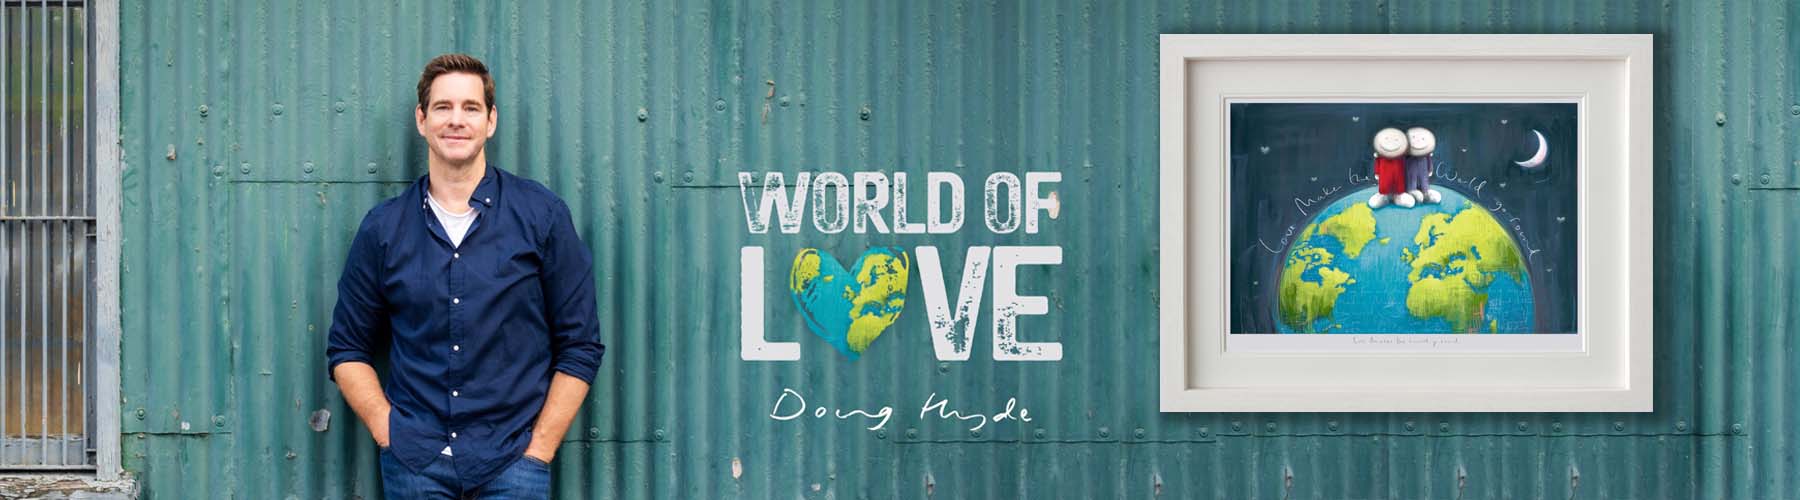 New Realease from Doug Hyde - World of Love - Featuring new limited edition prints, mixed media editions and sculpture